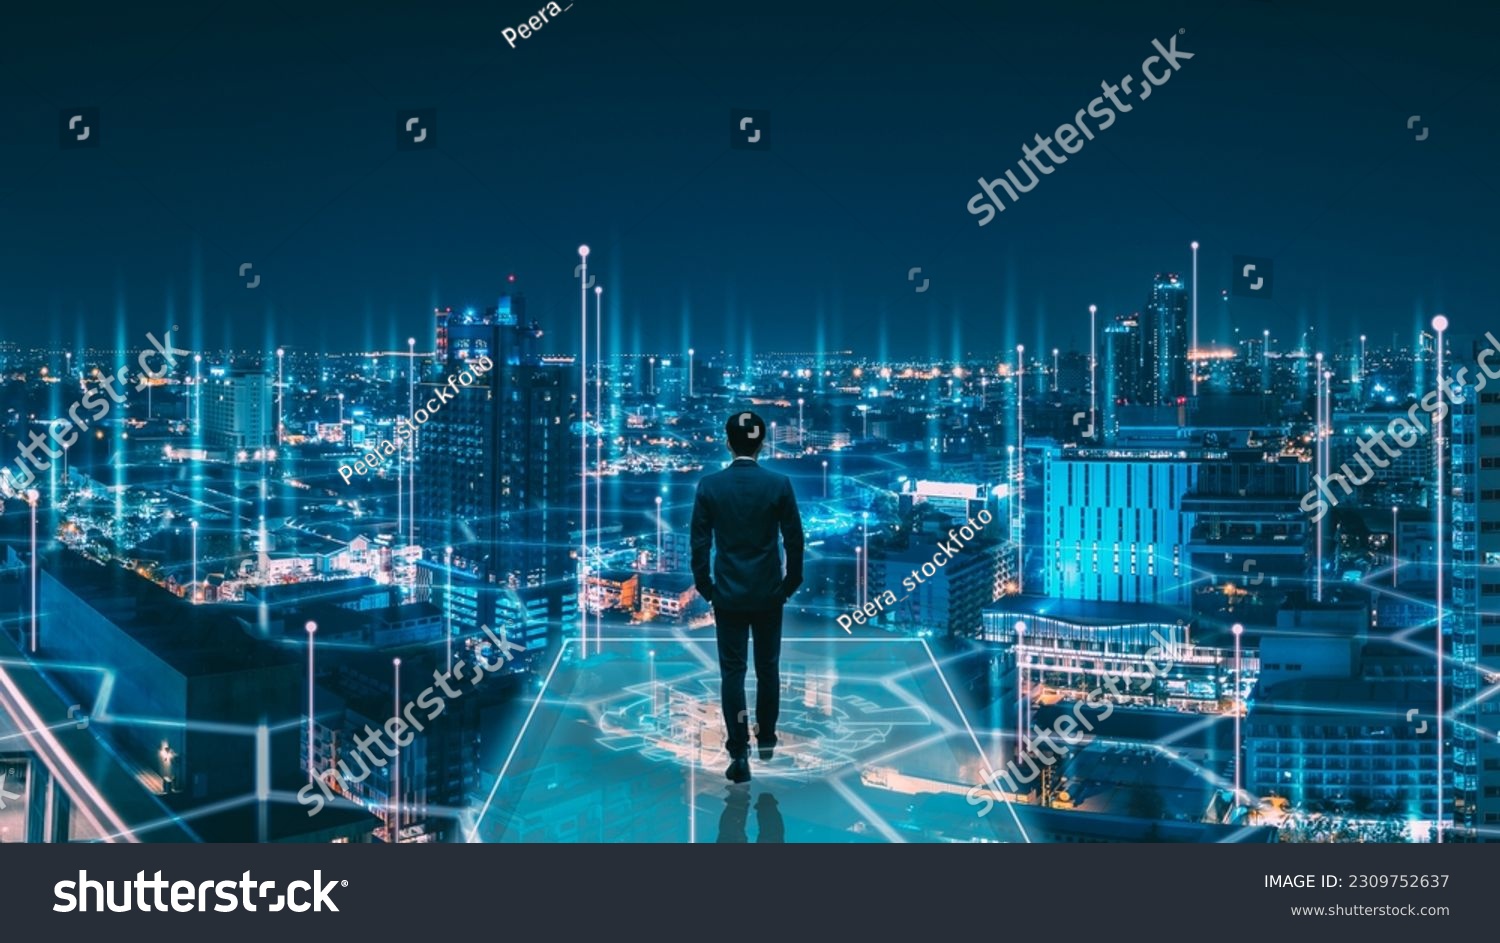 Business technology concept, Professional business man walking on future Pattaya city background and futuristic interface graphic at night, Cyberpunk color style #2309752637